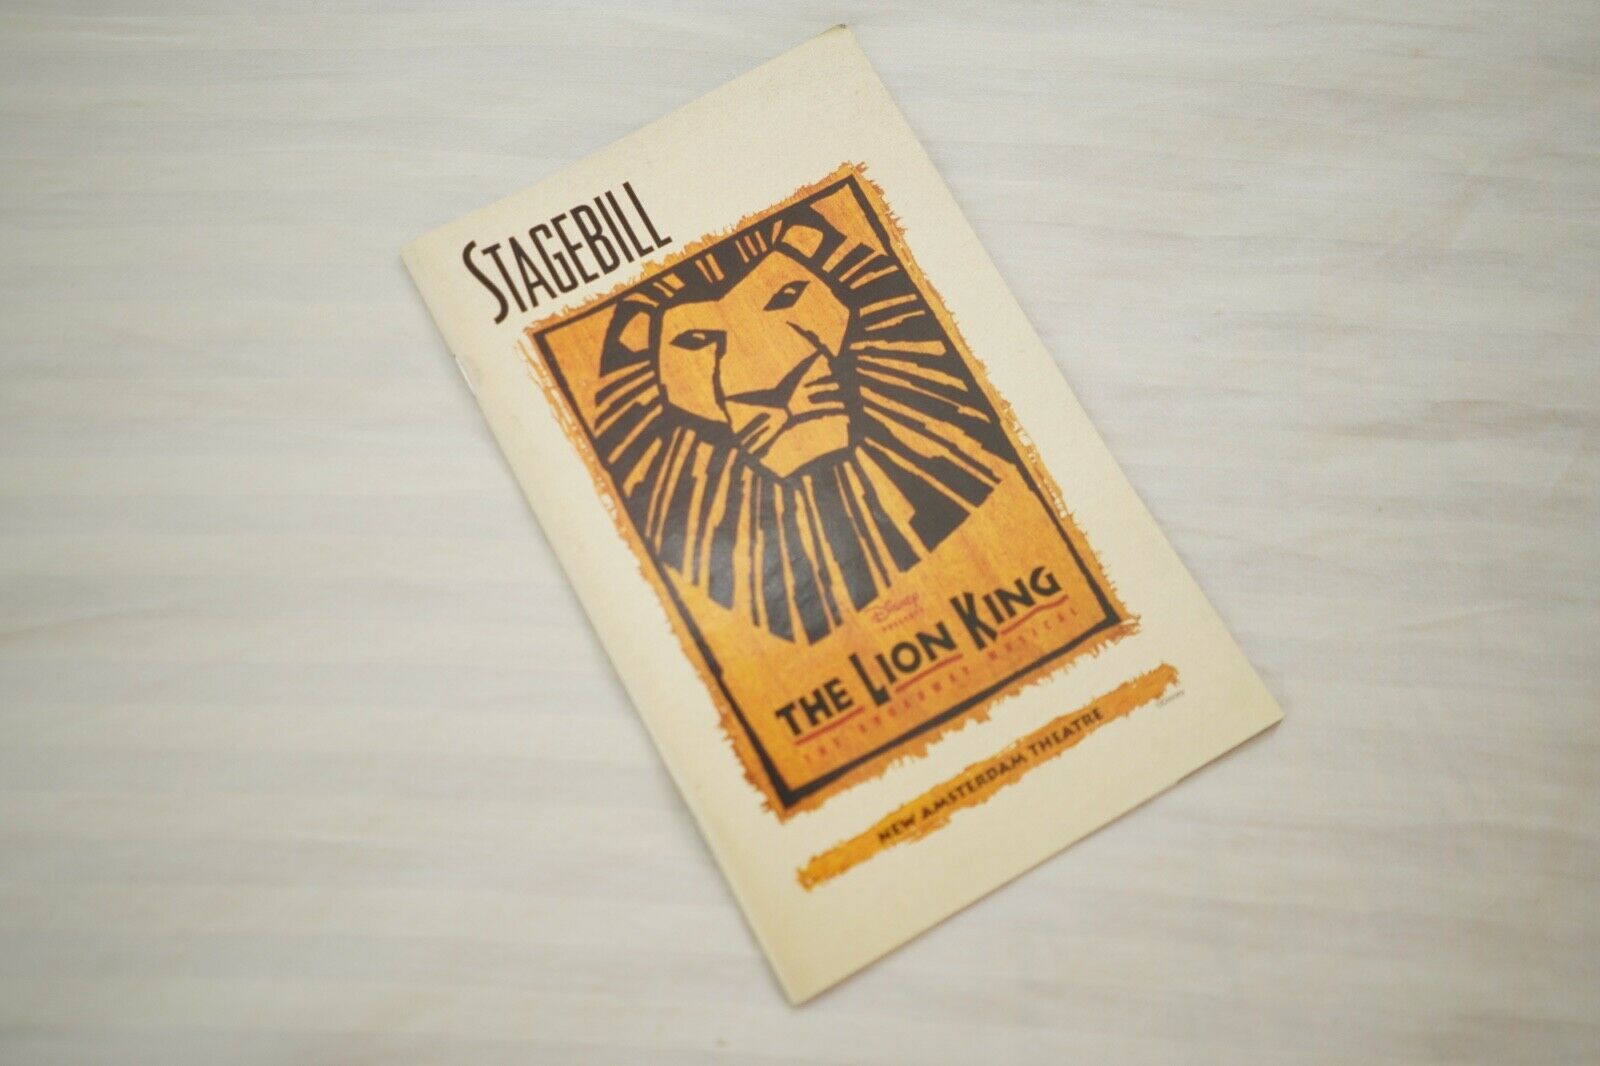 download the lion king playbill